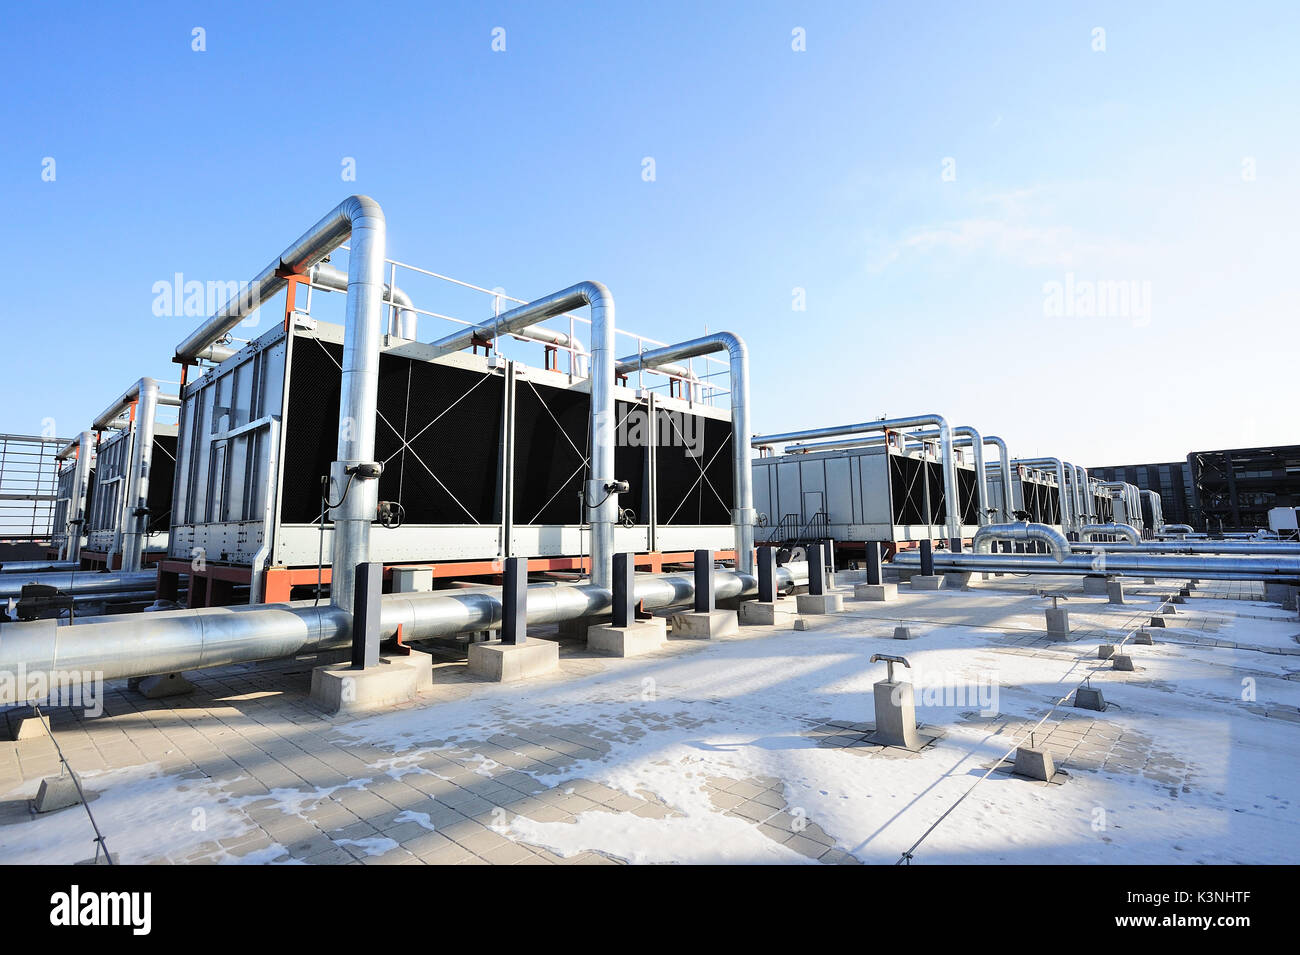 Cooling Center High Resolution Stock Photography and Images - Alamy